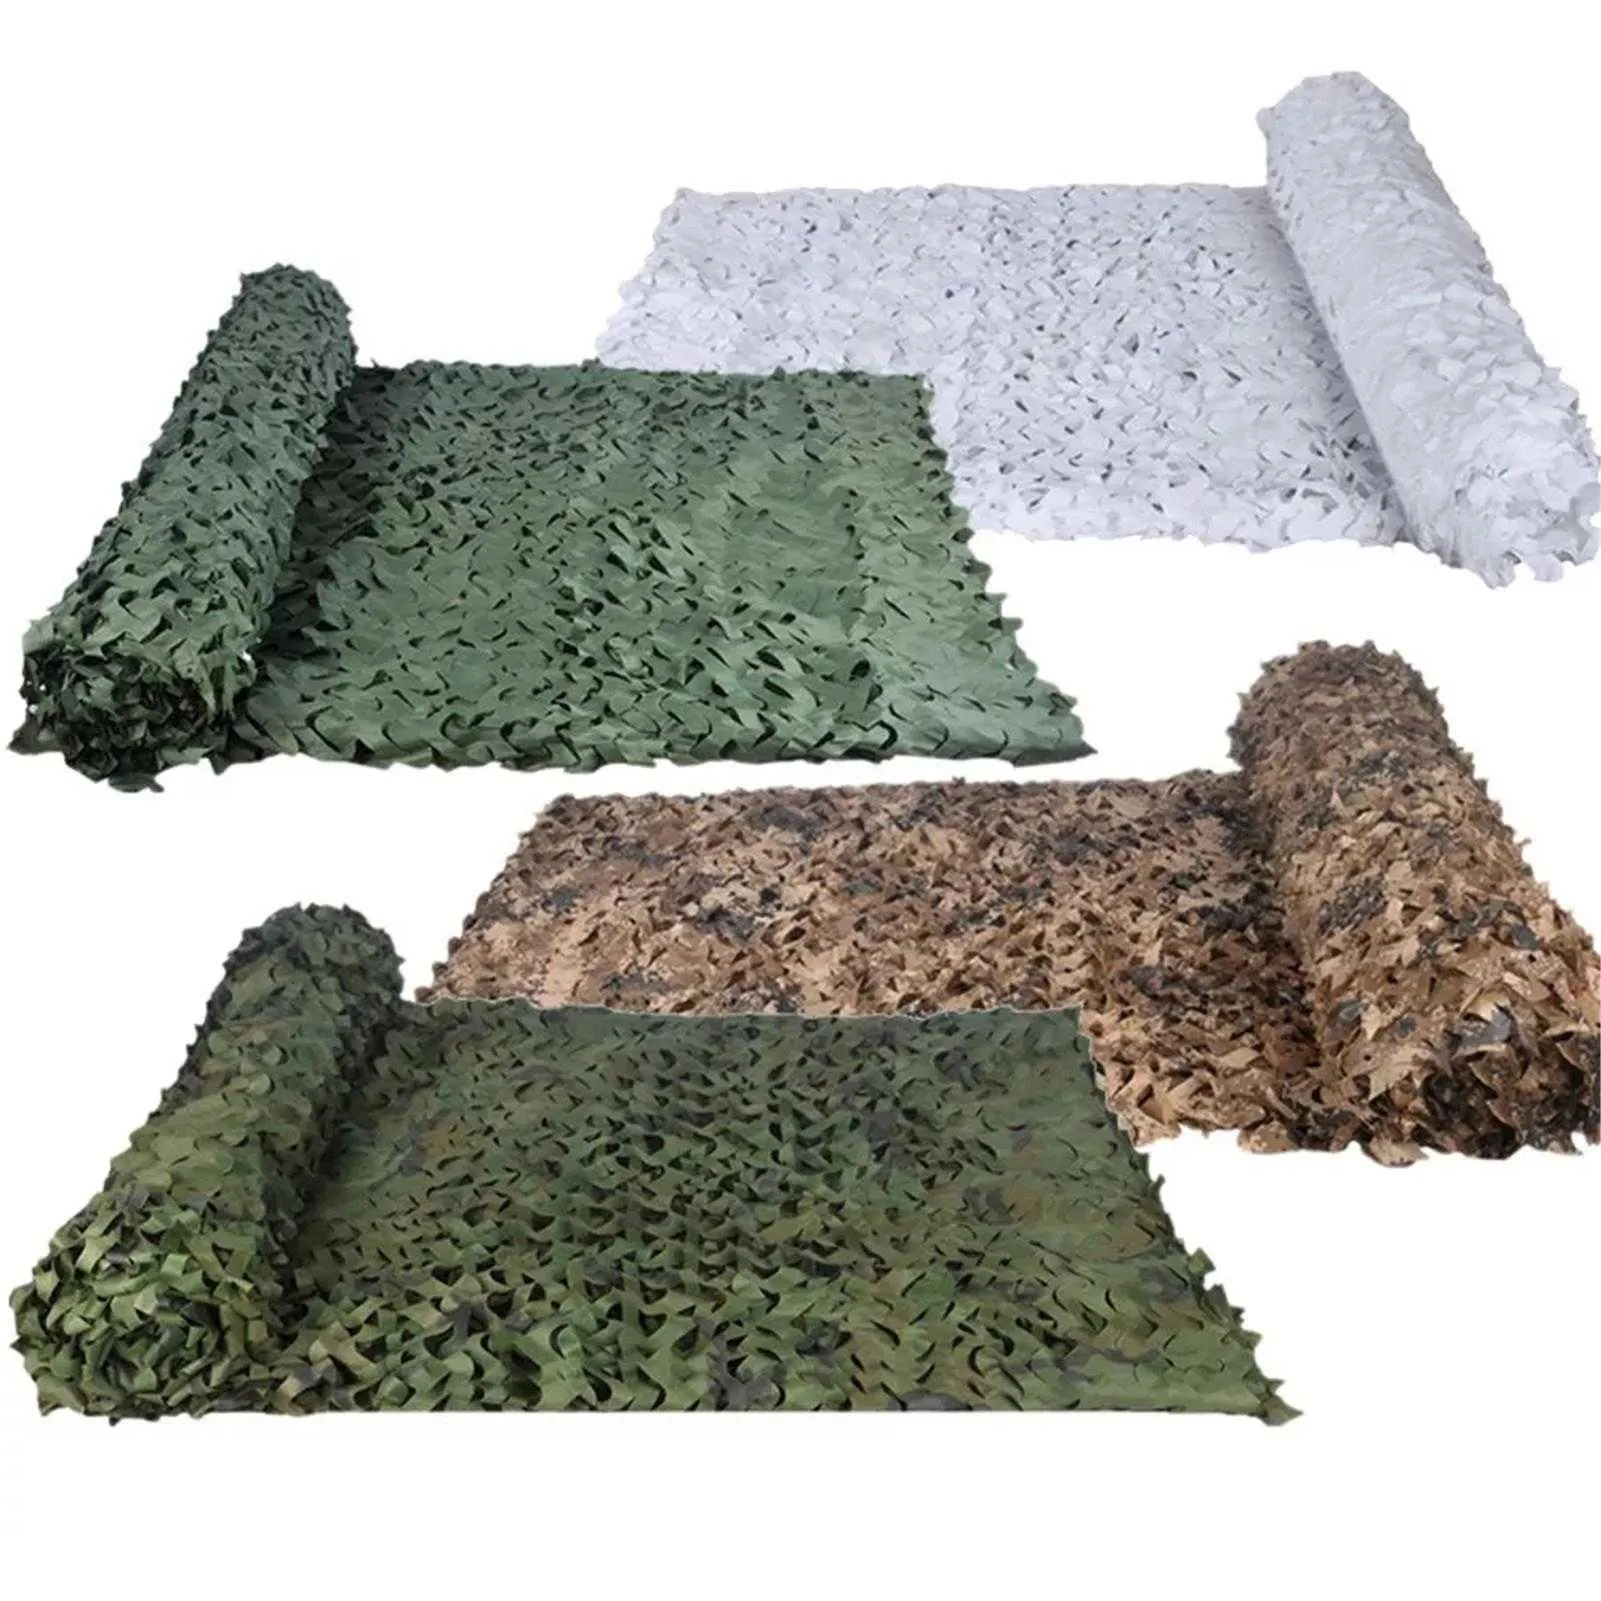 Multi Size Hunting Military Camouflage Net Hiding Mesh Sun Shelter Woodland Camo Camping Sun Shade for Garden Pergolas Awning Y0706